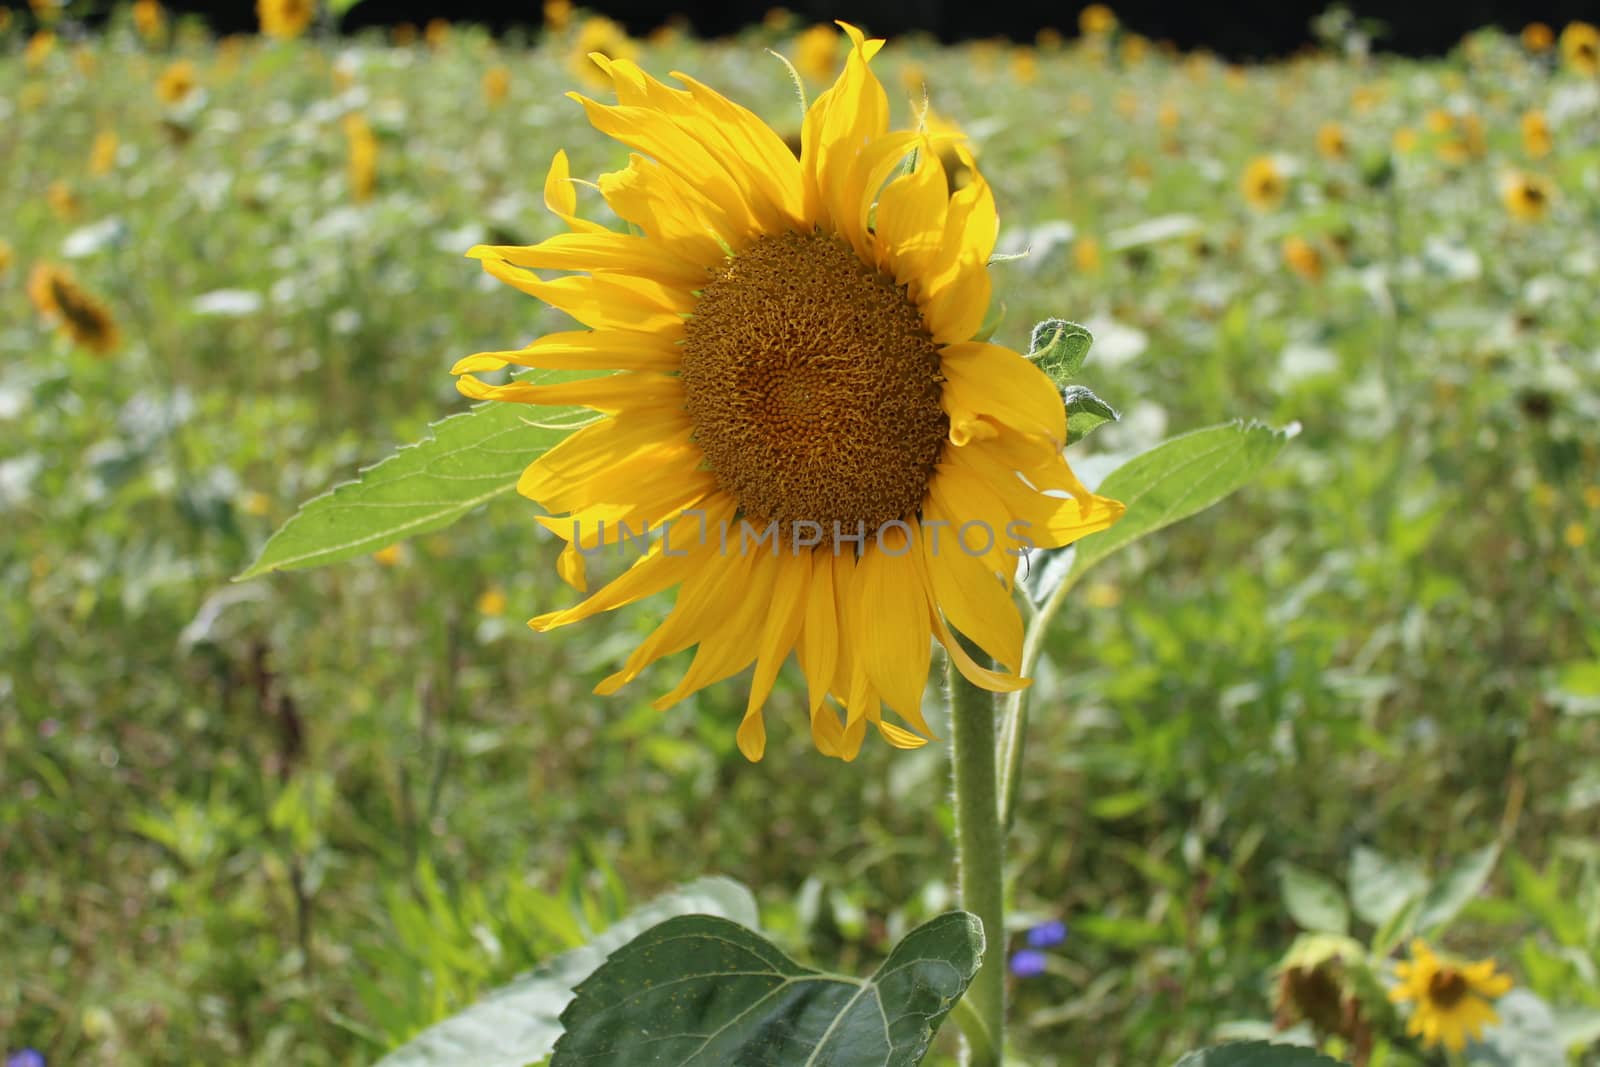 The picture shows beautiful sunflowers in the garden.